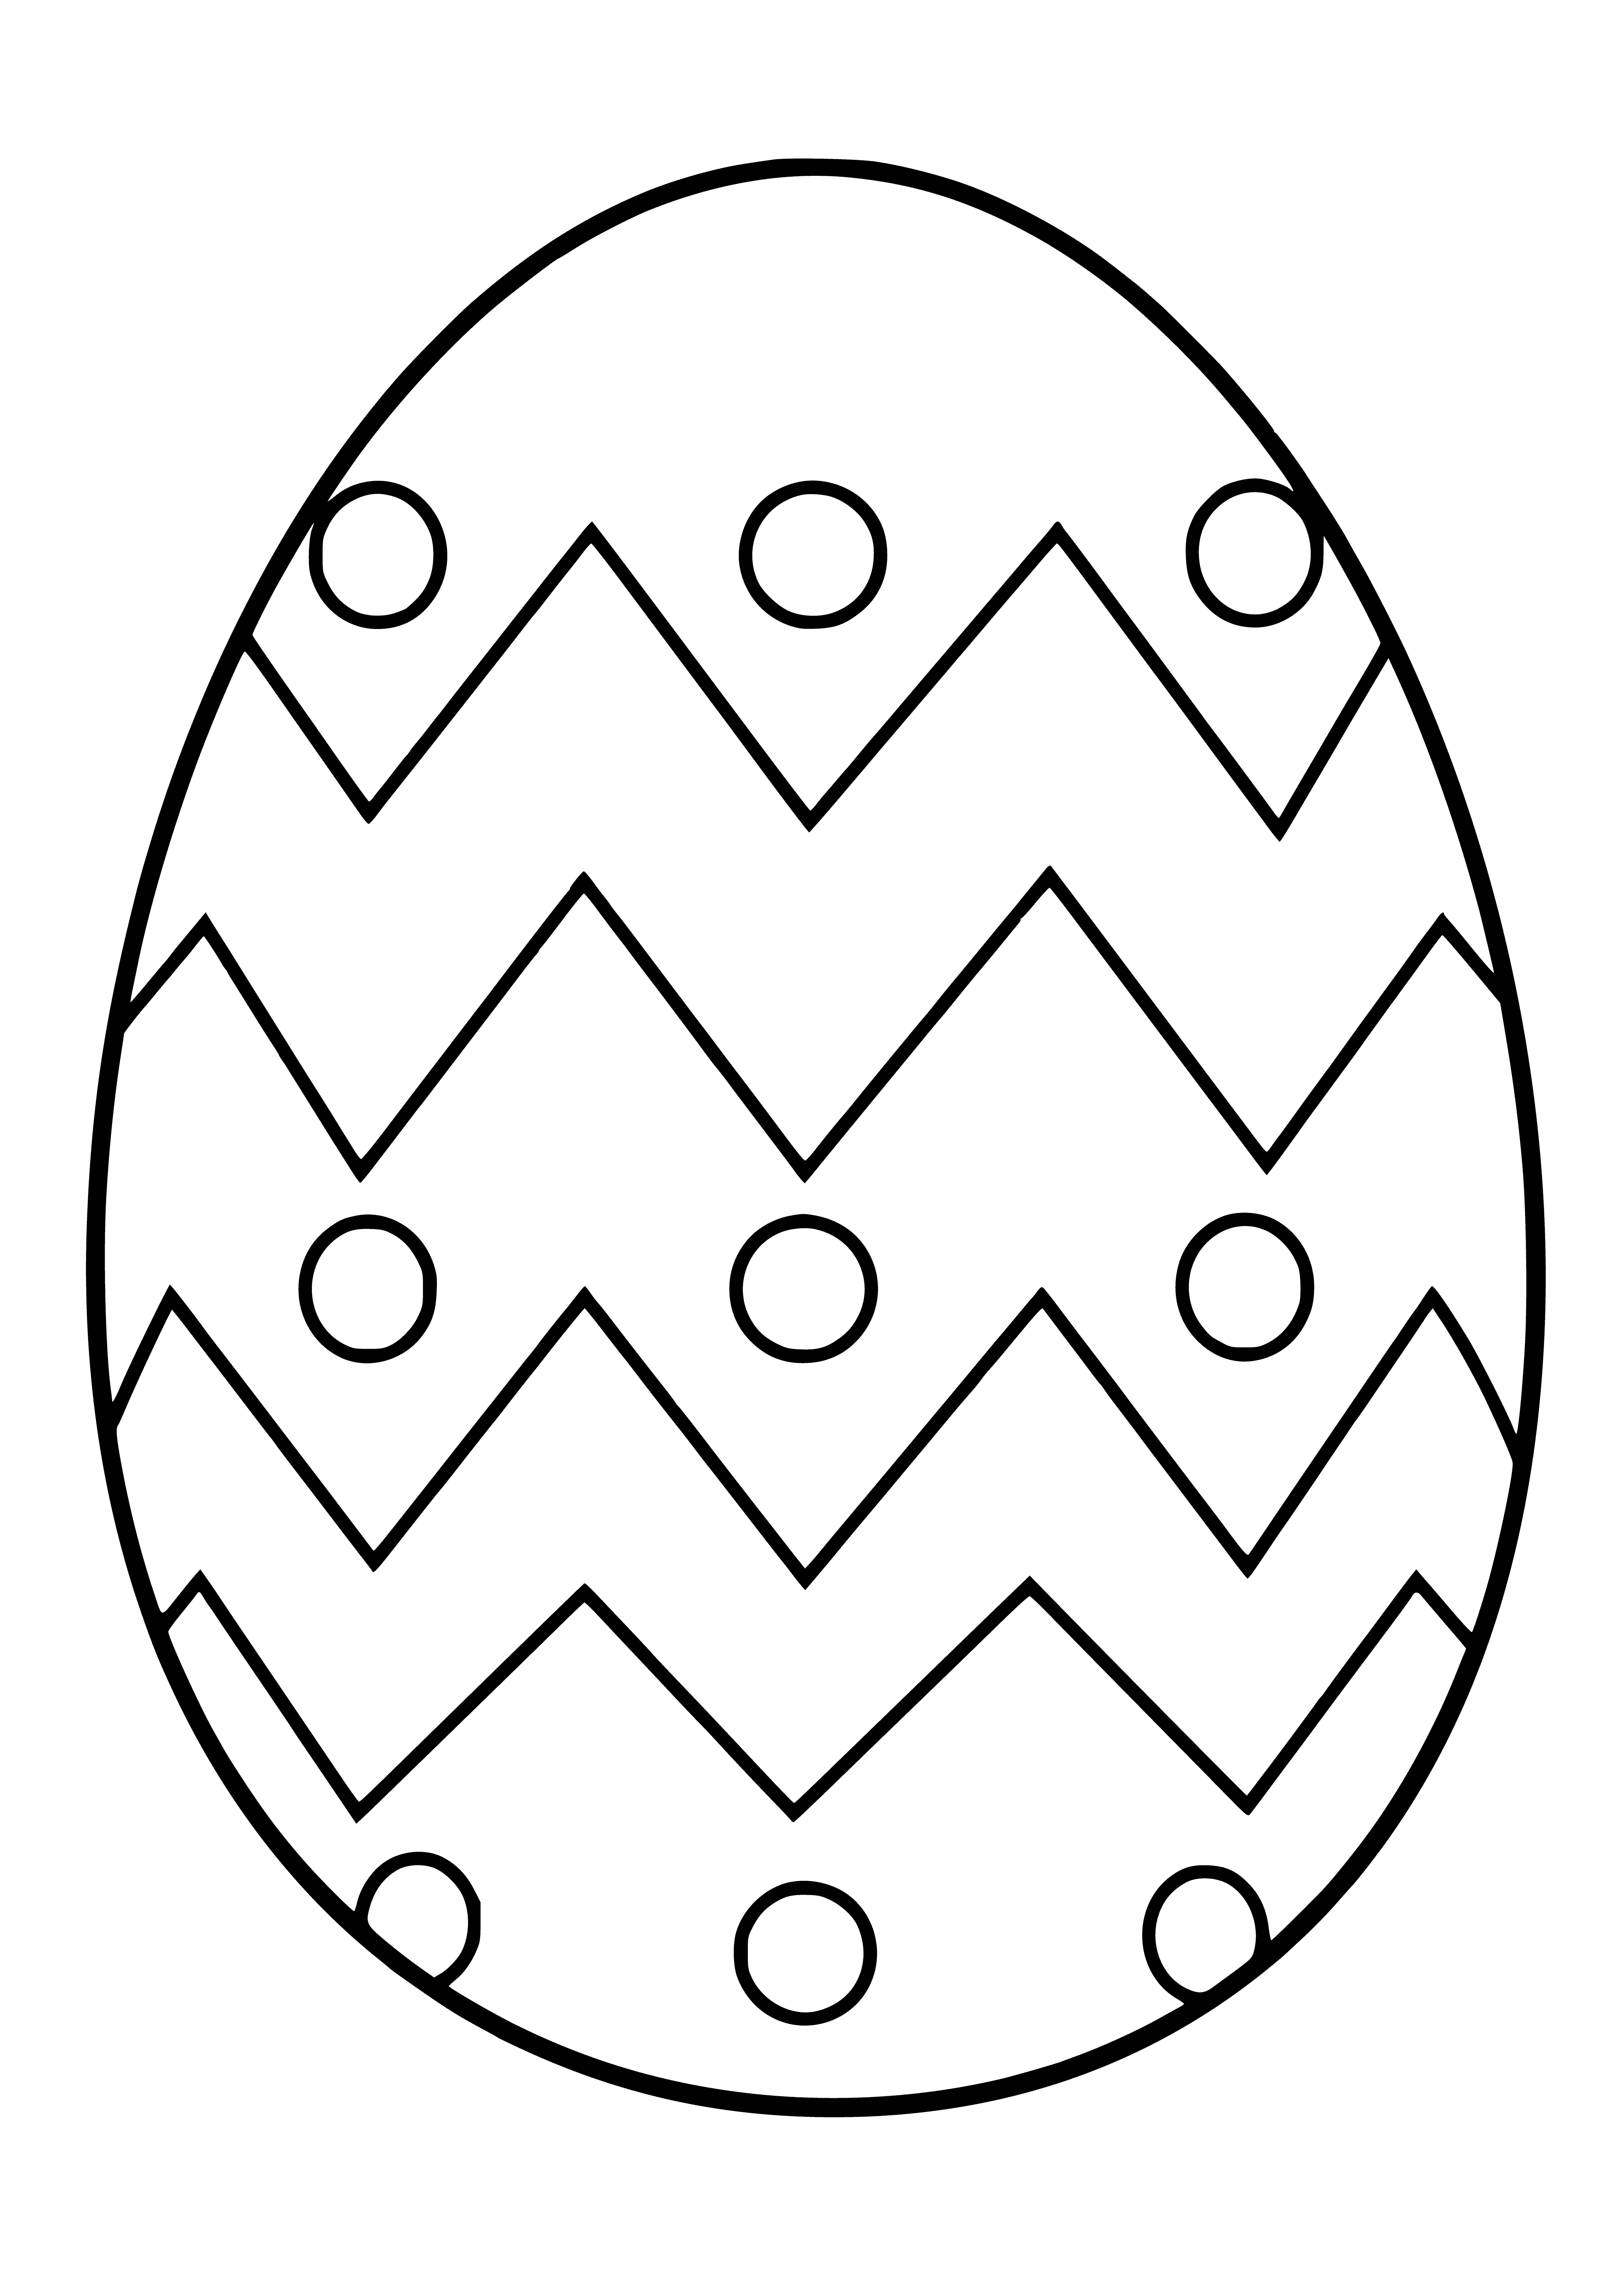 coloring page: Three colored eggs and one white egg in a basket, ready for some Easter fun! #Easter